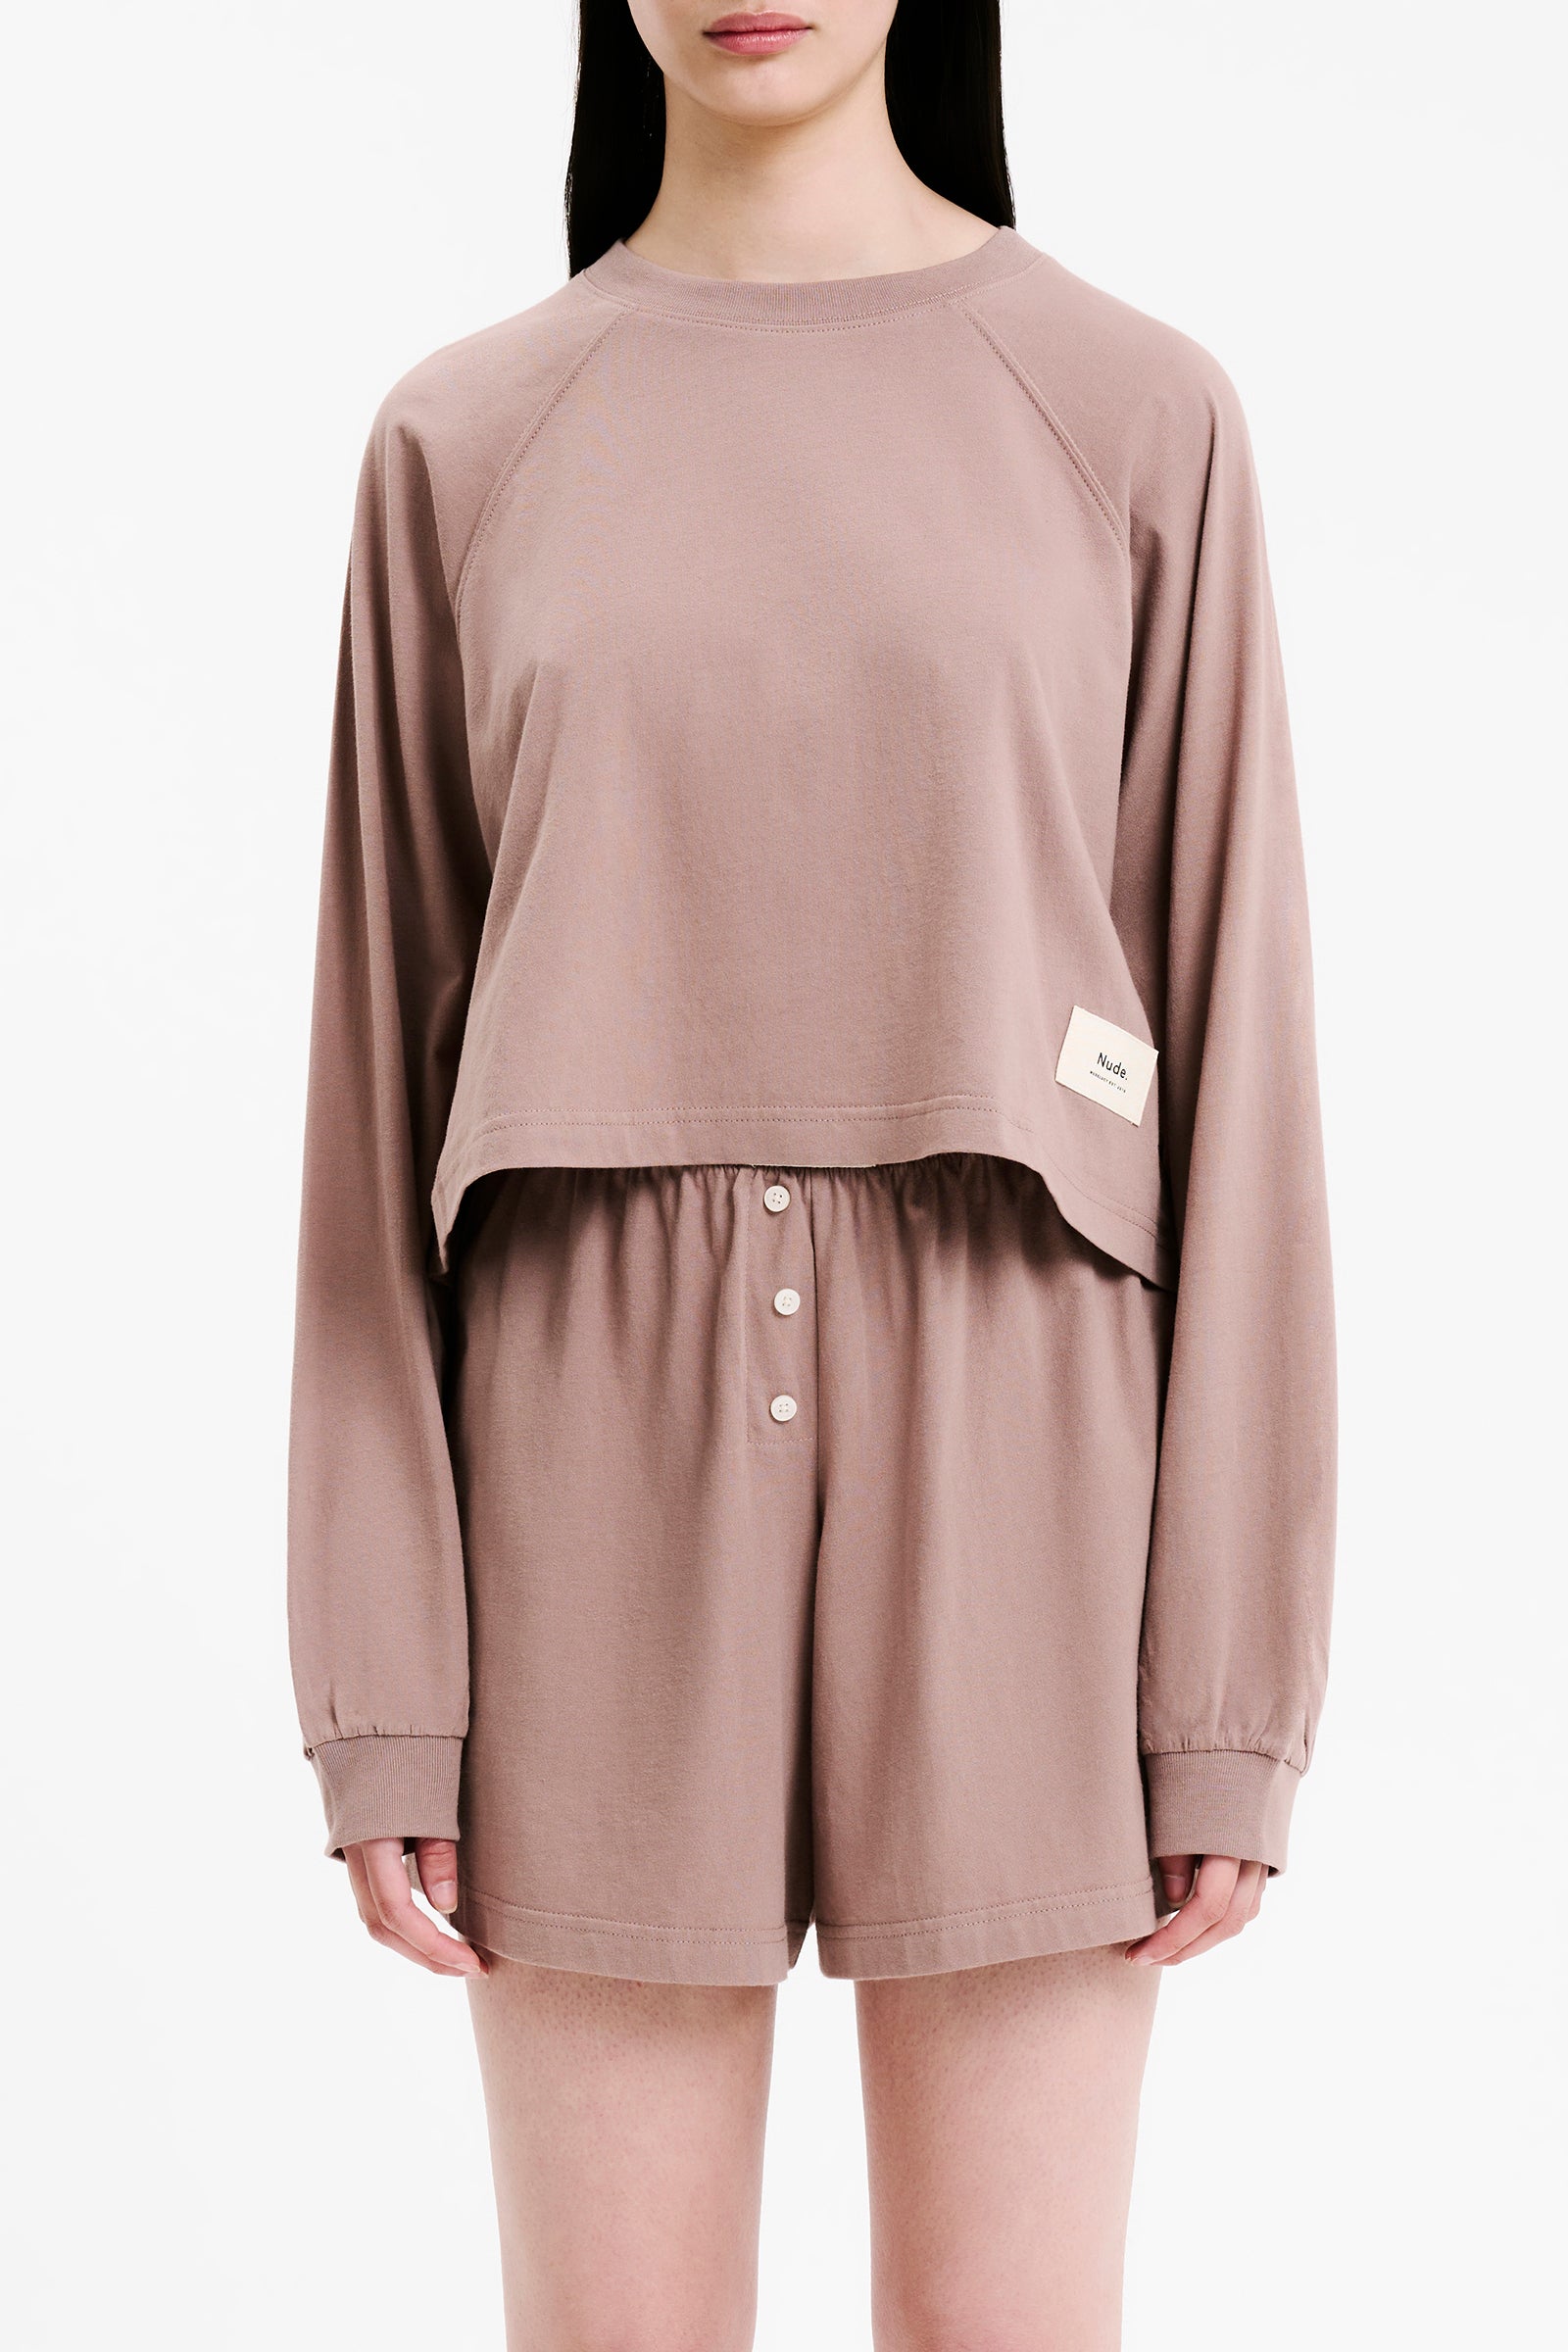 Nude Lucy Lounge Jersey L S Tee in a Brown Carob Colour